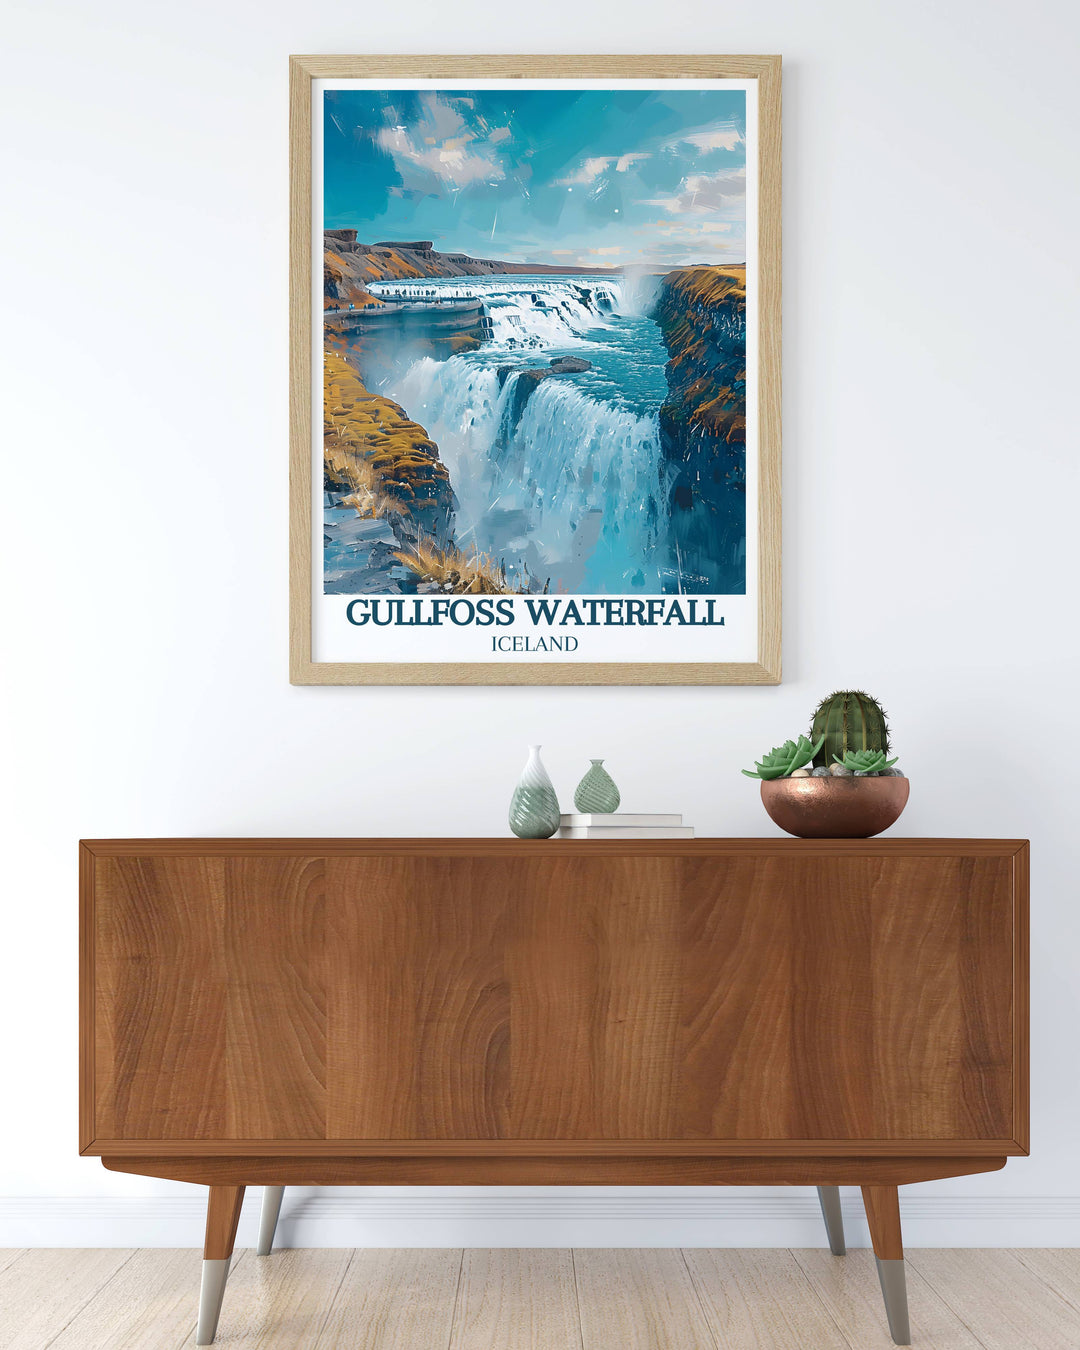 Gullfoss Waterfall frozen in winter, its icy form captured in a breathtaking framed print of Iceland.